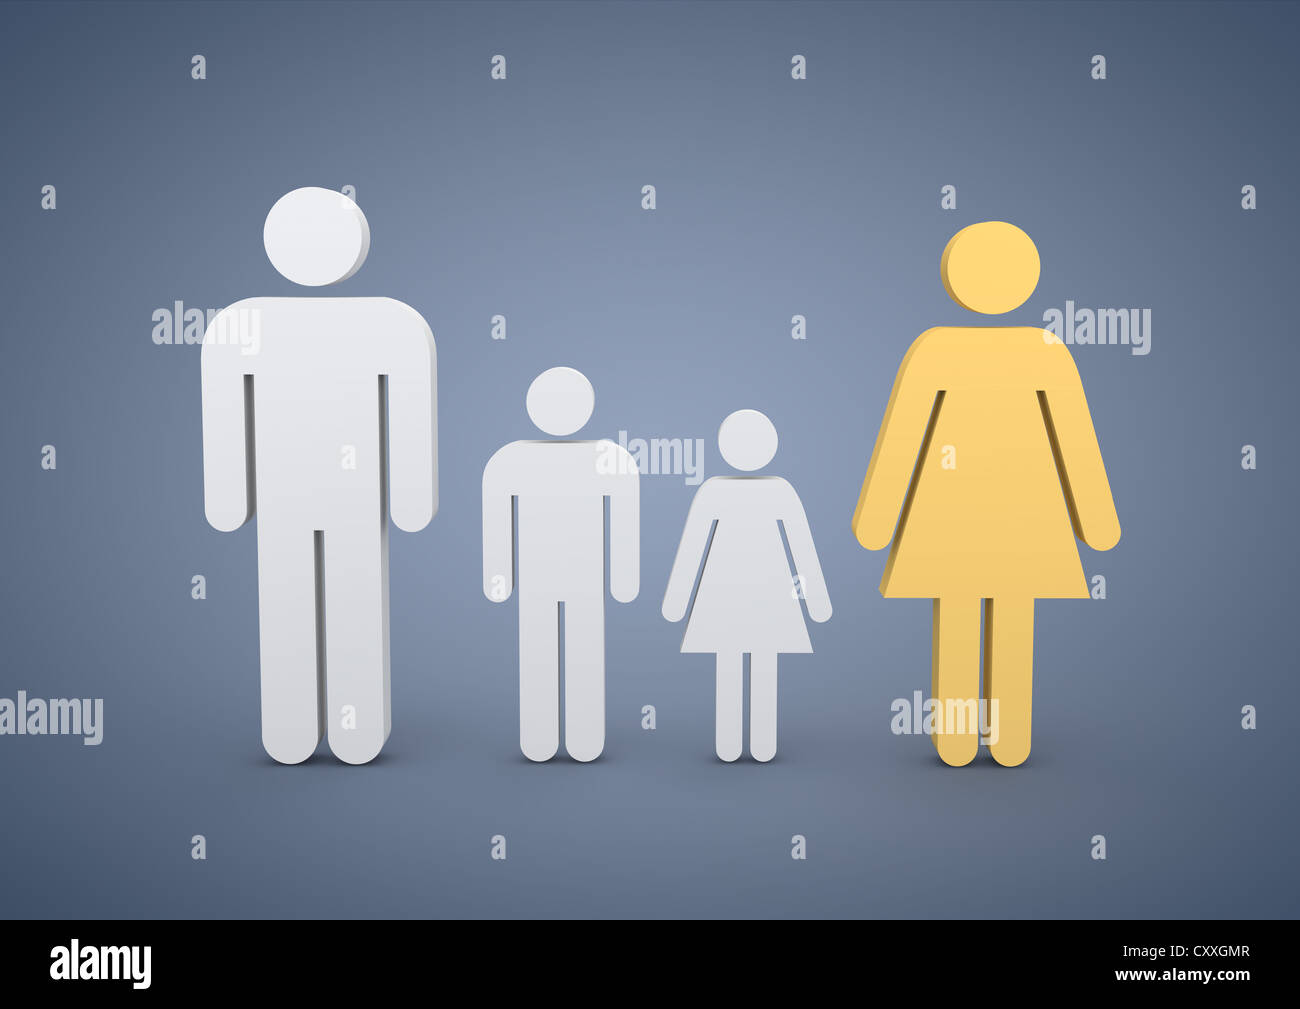 family-with-two-children-symbolic-image-for-sole-wage-earner-married-couples-tax-splitting-3d